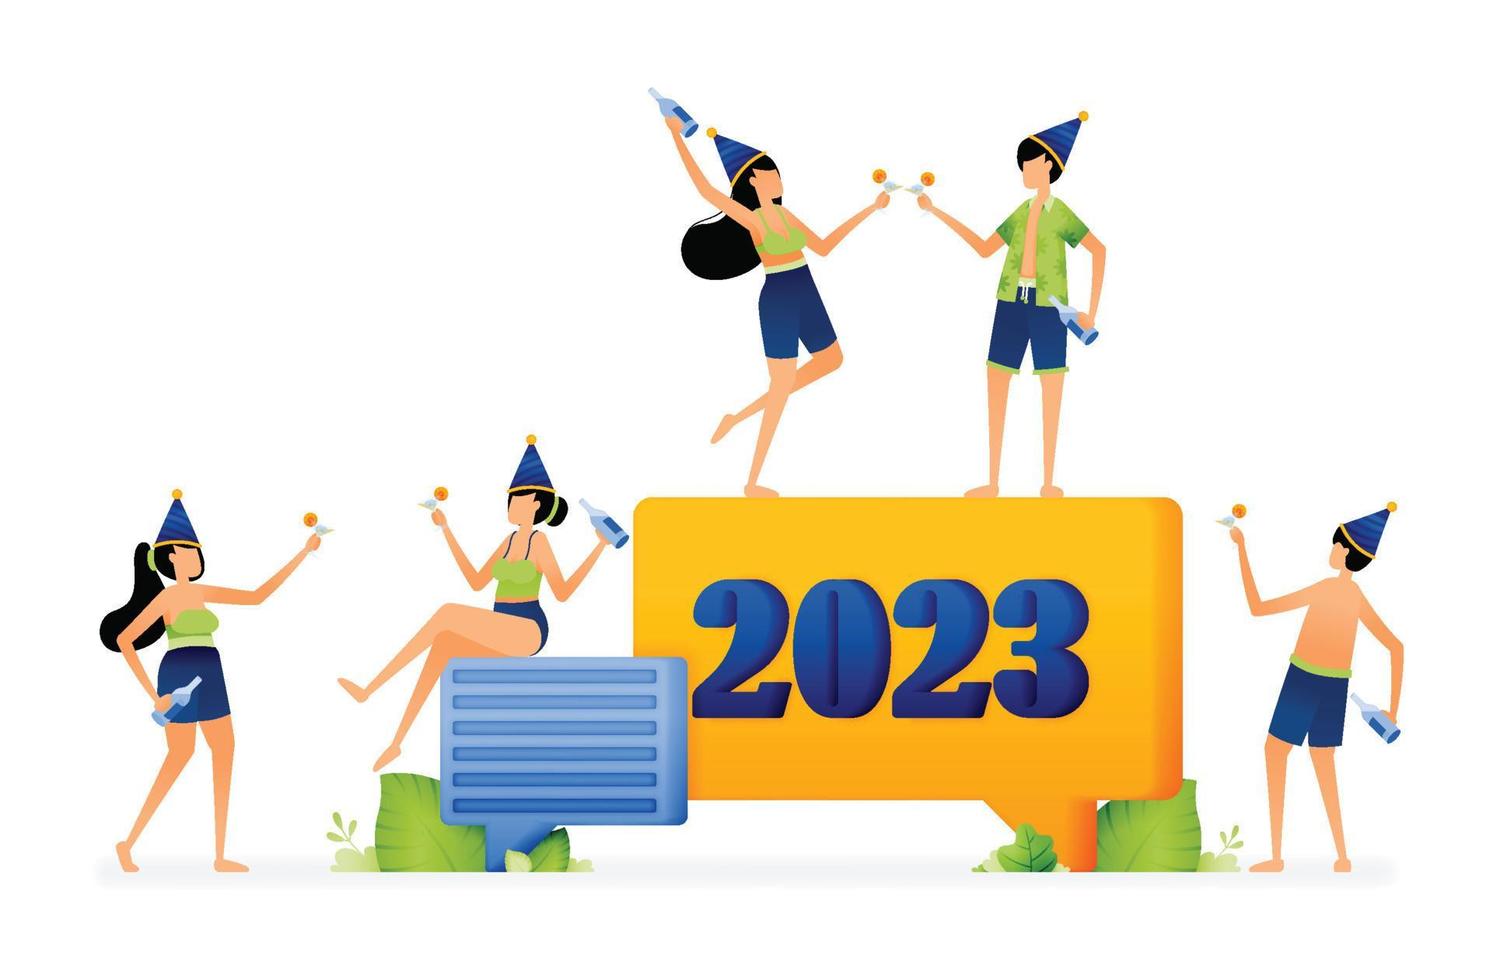 Party illustration of people drinking and talking to each other on the beach to welcome the new year 2023. Designed for website, landing page, flyer, banner, apps, brochure, startup media company vector